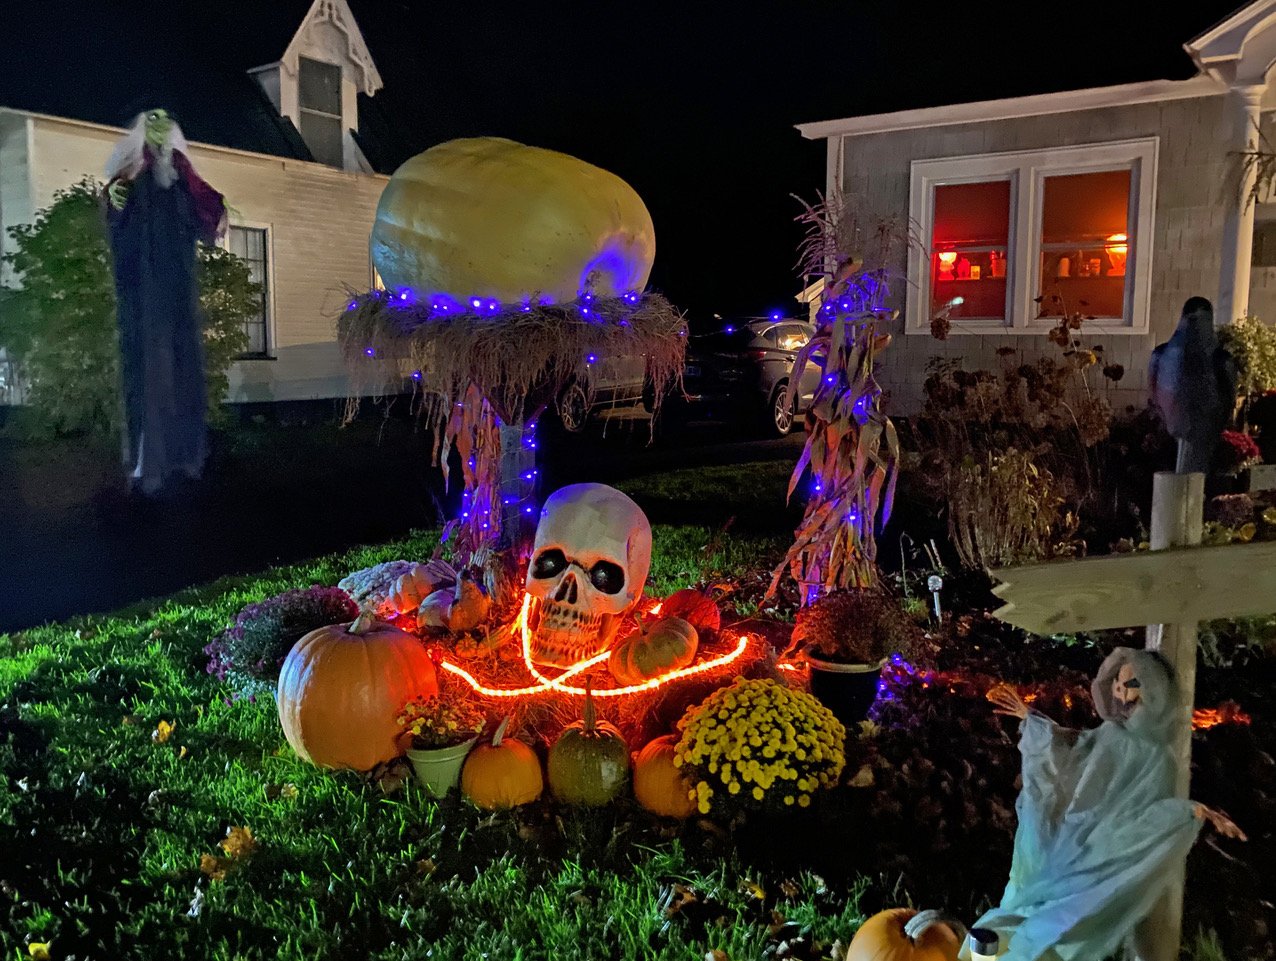  Rich Wilbur’s lighted front yard on South Main Street celebrates the season with spooky characters and a giant gourd. Photo by Gordon Miller 